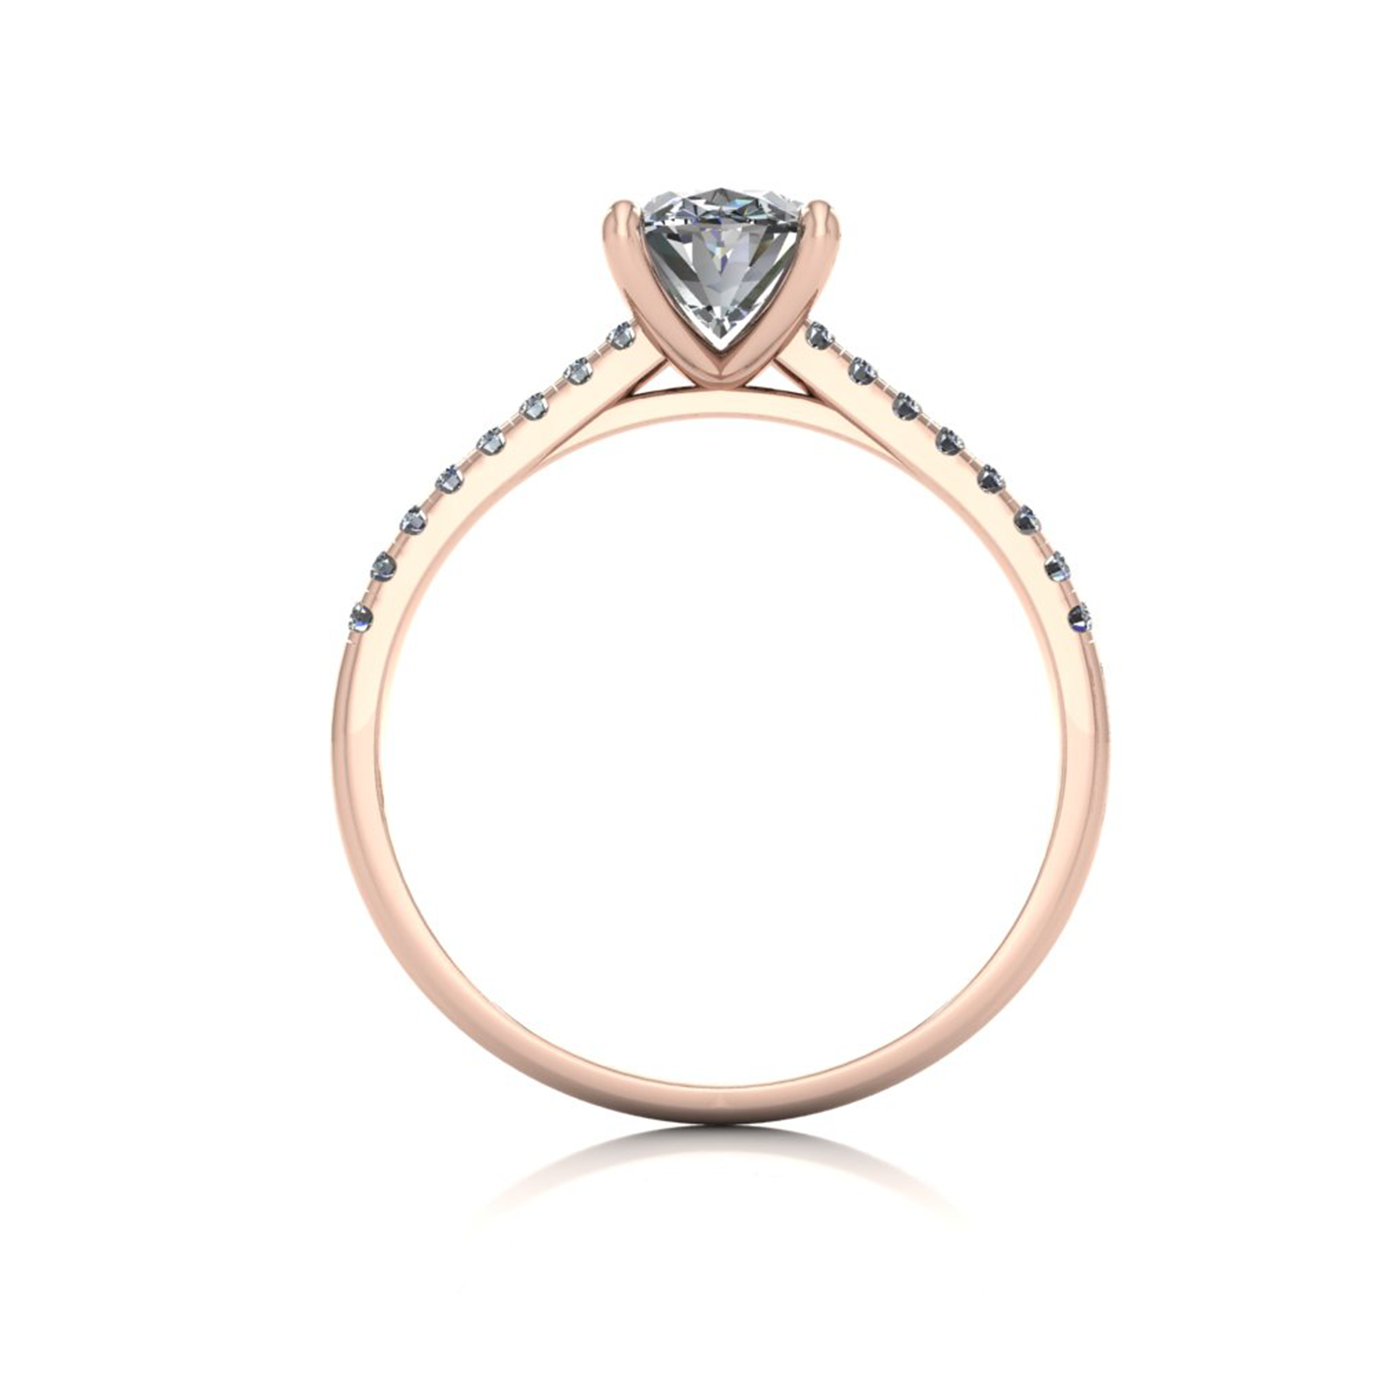 18k rose gold  1,00 ct 4 prongs oval cut diamond engagement ring with whisper thin pavÉ set band